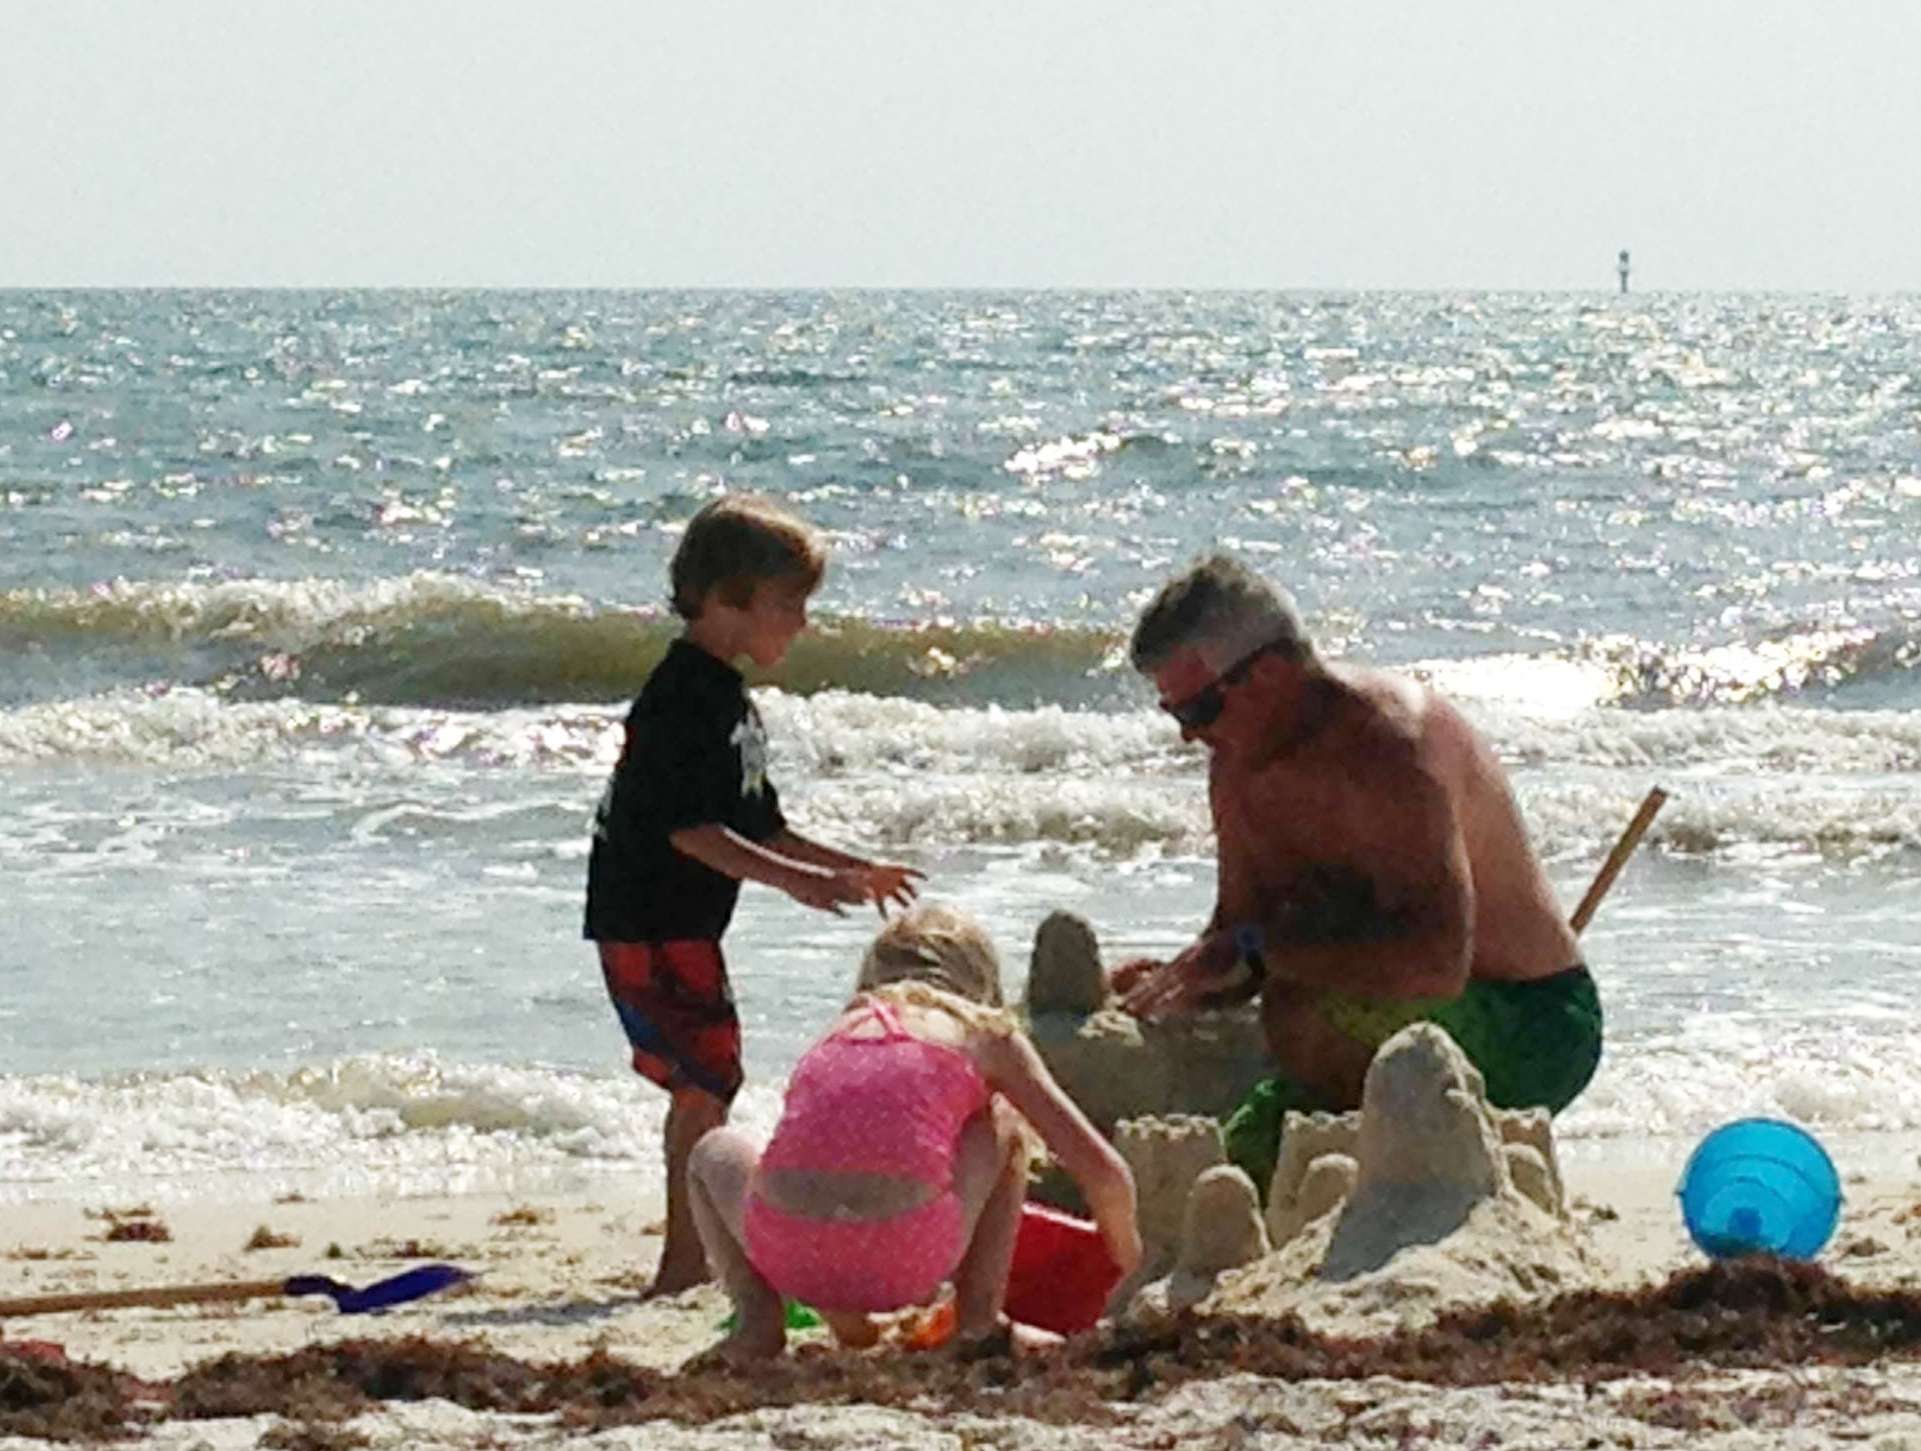 Randall Tharp and family relaxing on the beach, building sandcastles. 